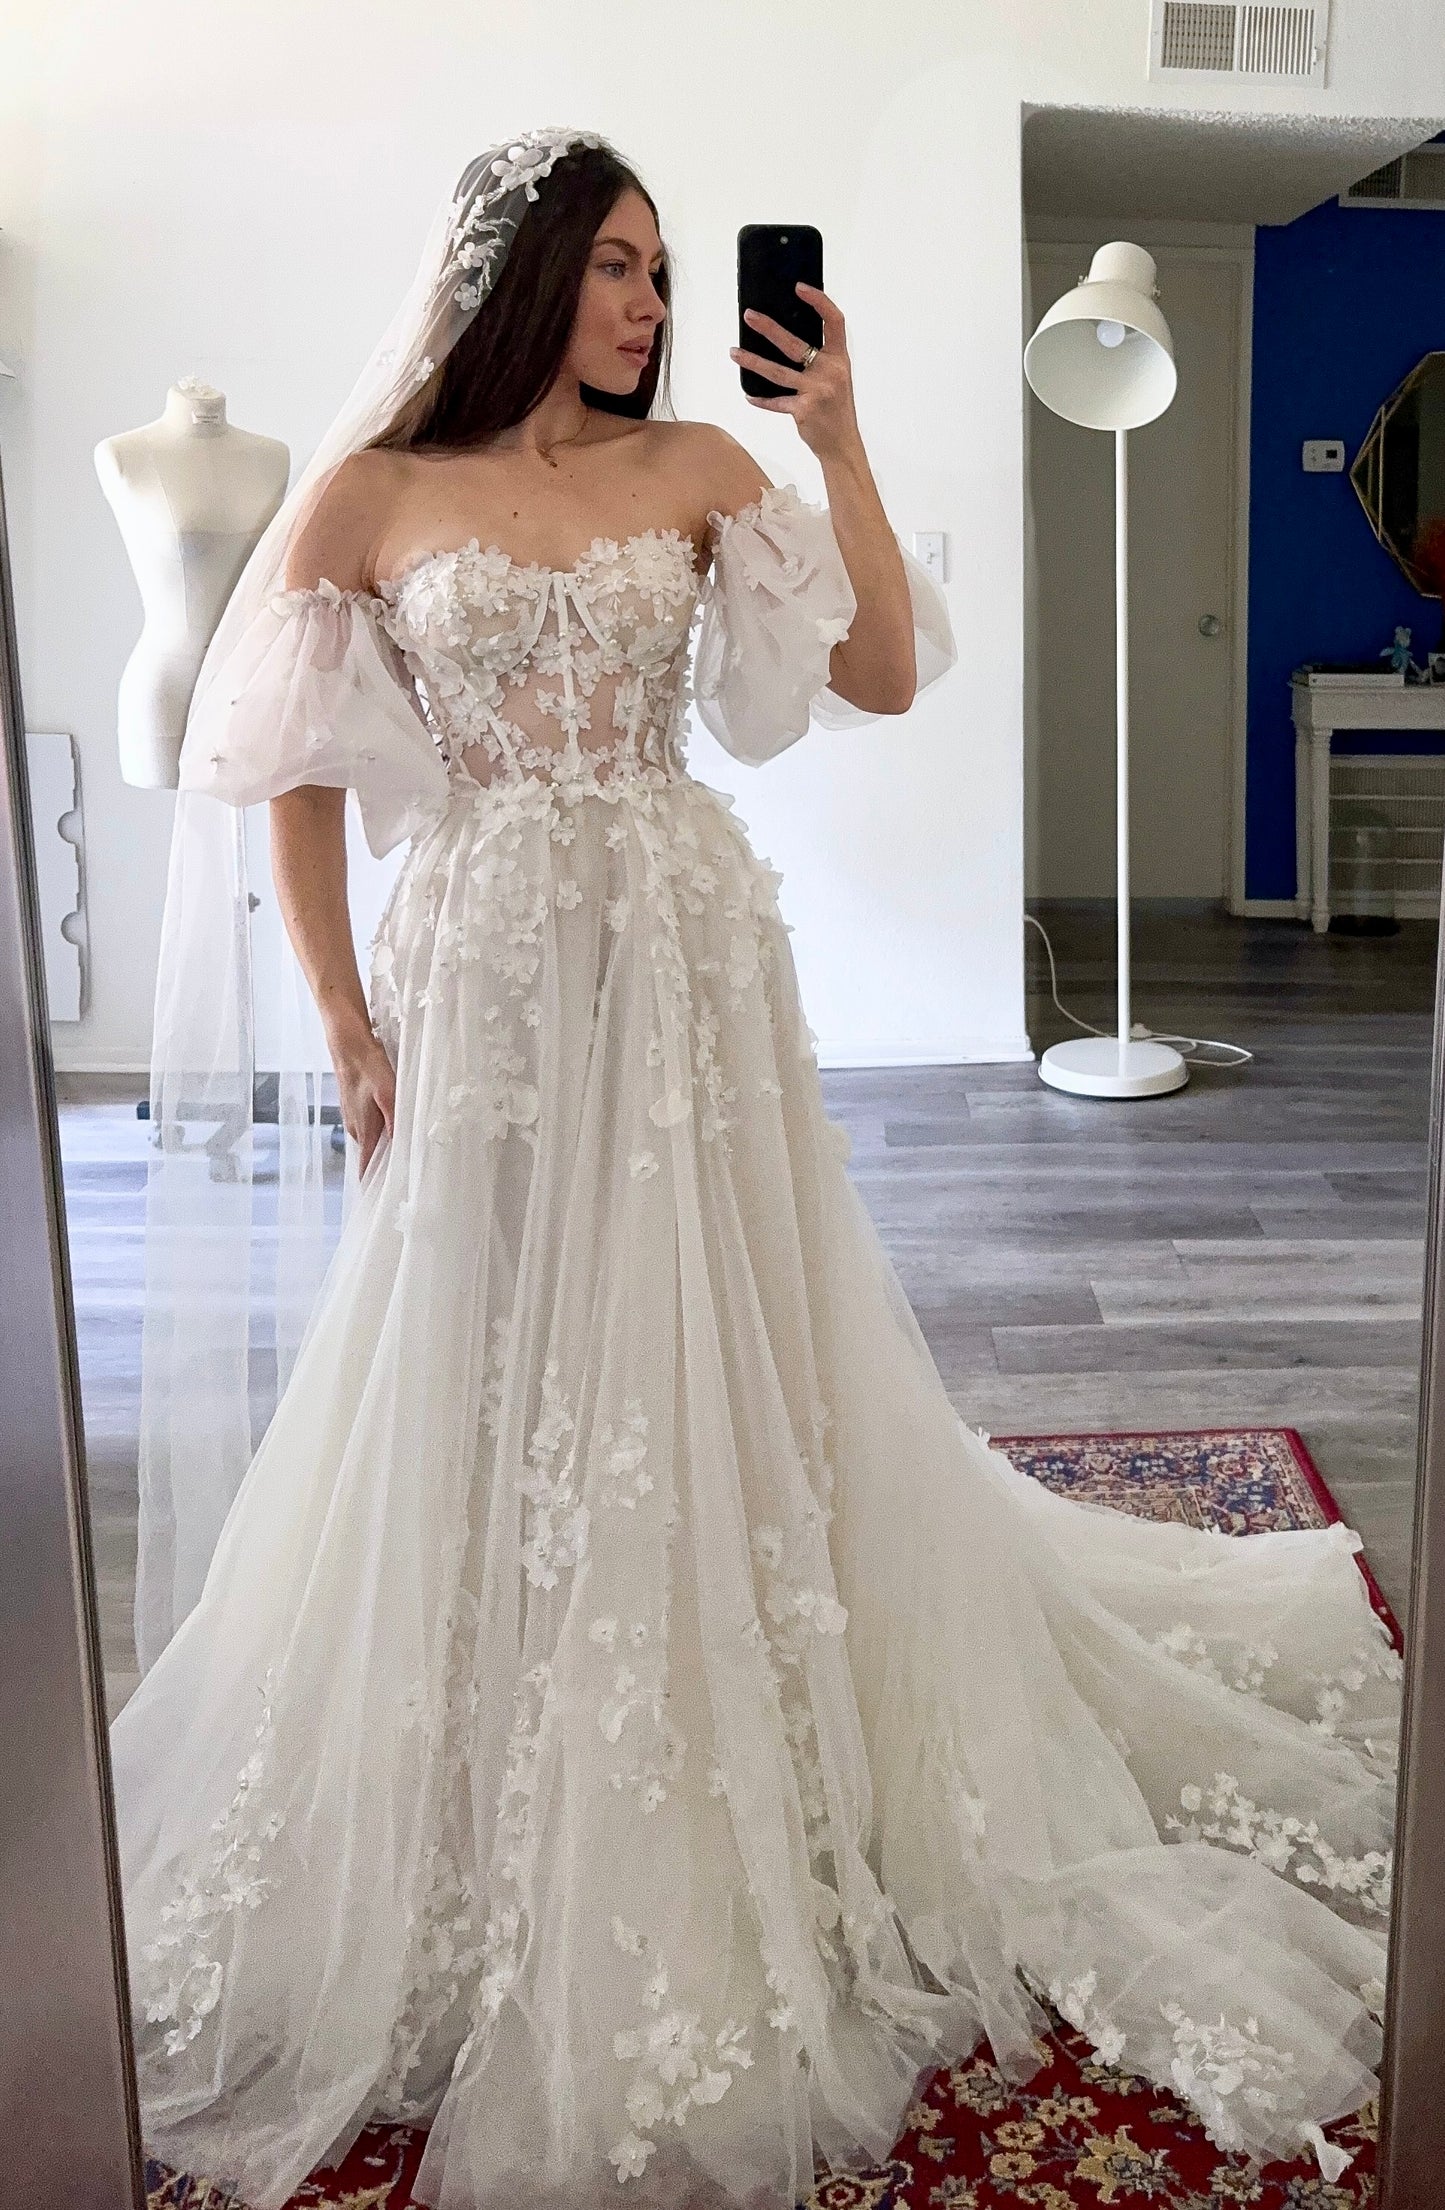 Alice / off white wedding dress with puffy sleeves